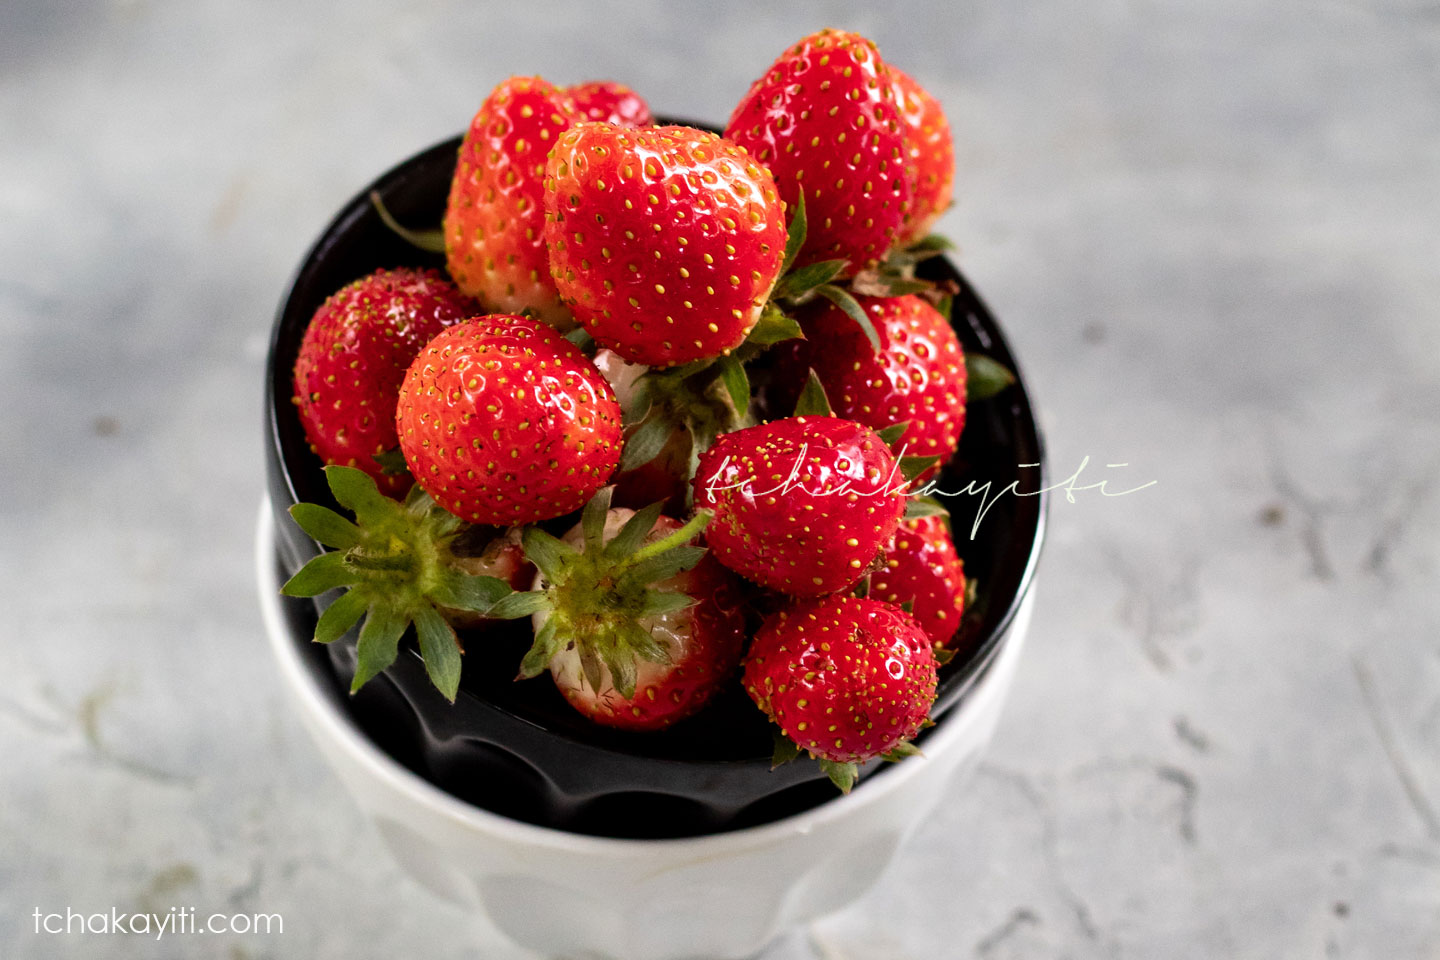 These strawberries are straight from our garden in Haiti. They're tiny but packed with flavors. | tchakayiti.com